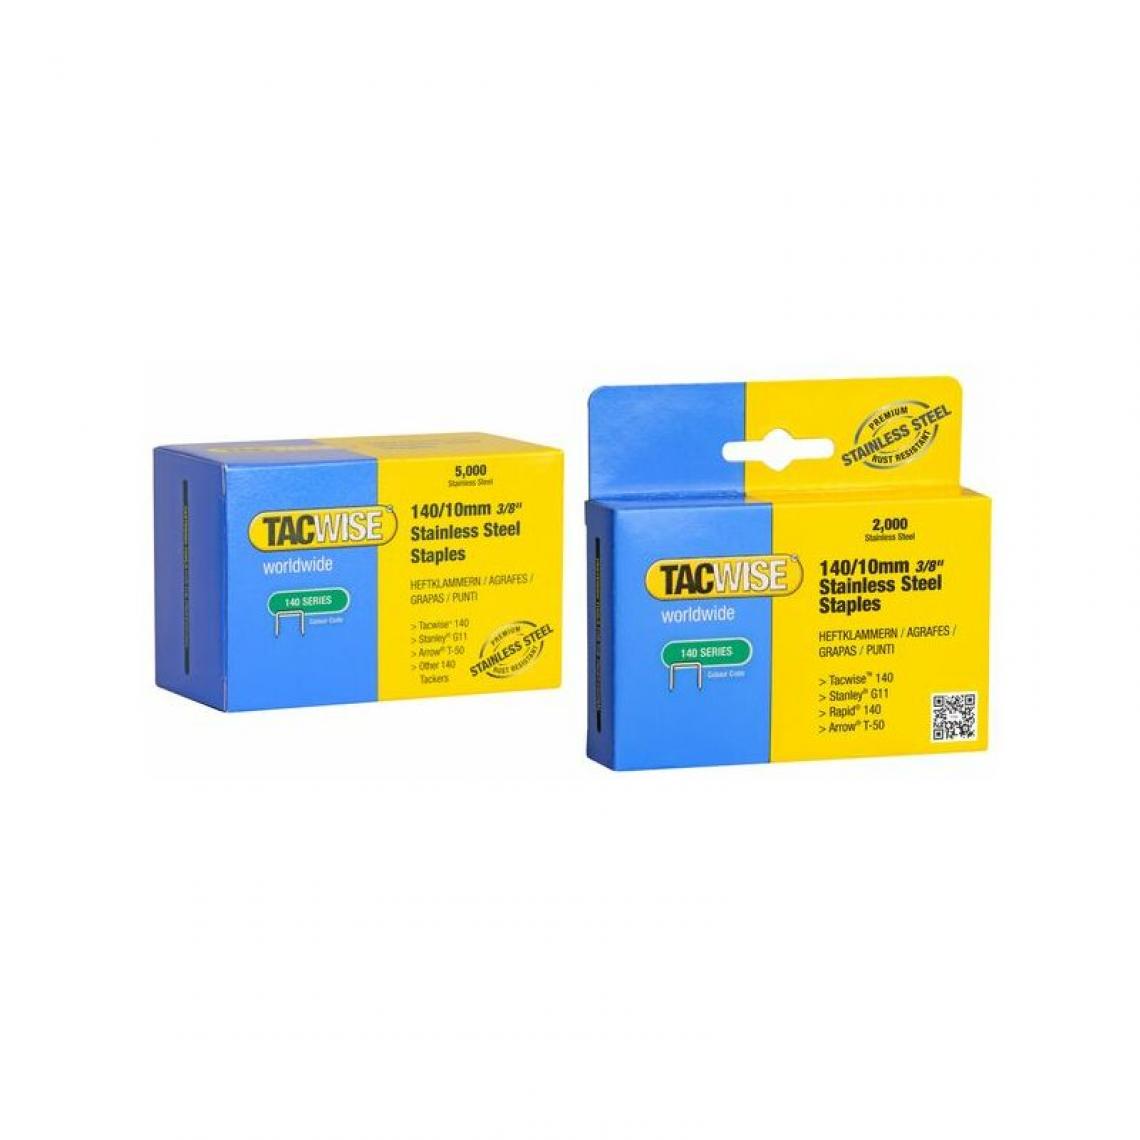 Tacwise - TACWISE Agrafes 140/12 mm, acier inoxydable, 2.000 pièces () - Boulonnerie